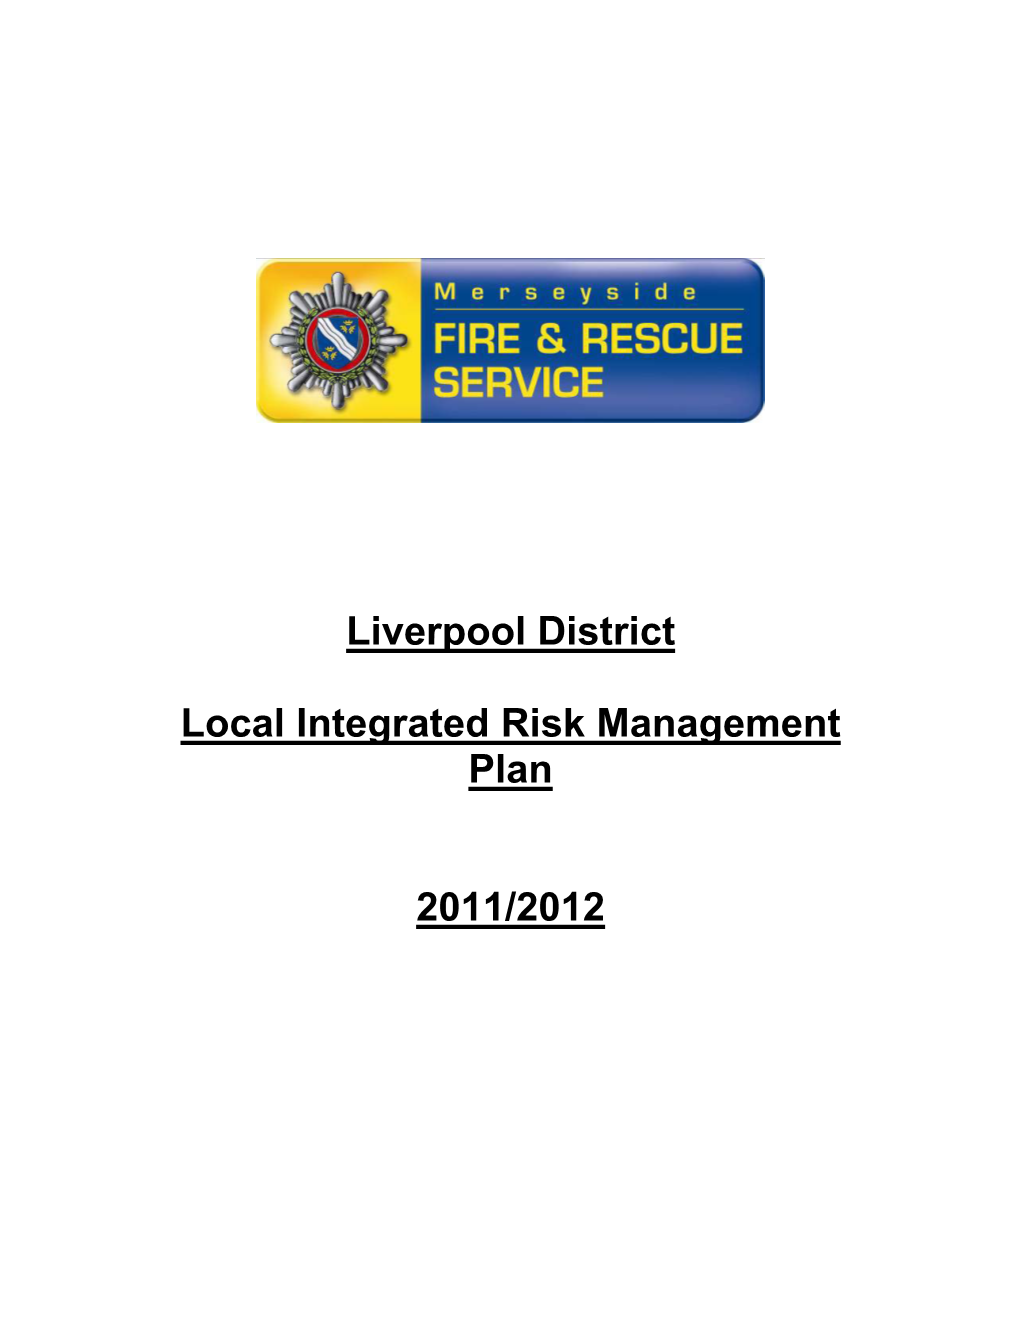 Liverpool District Local Integrated Risk Management Plan 2011/2012